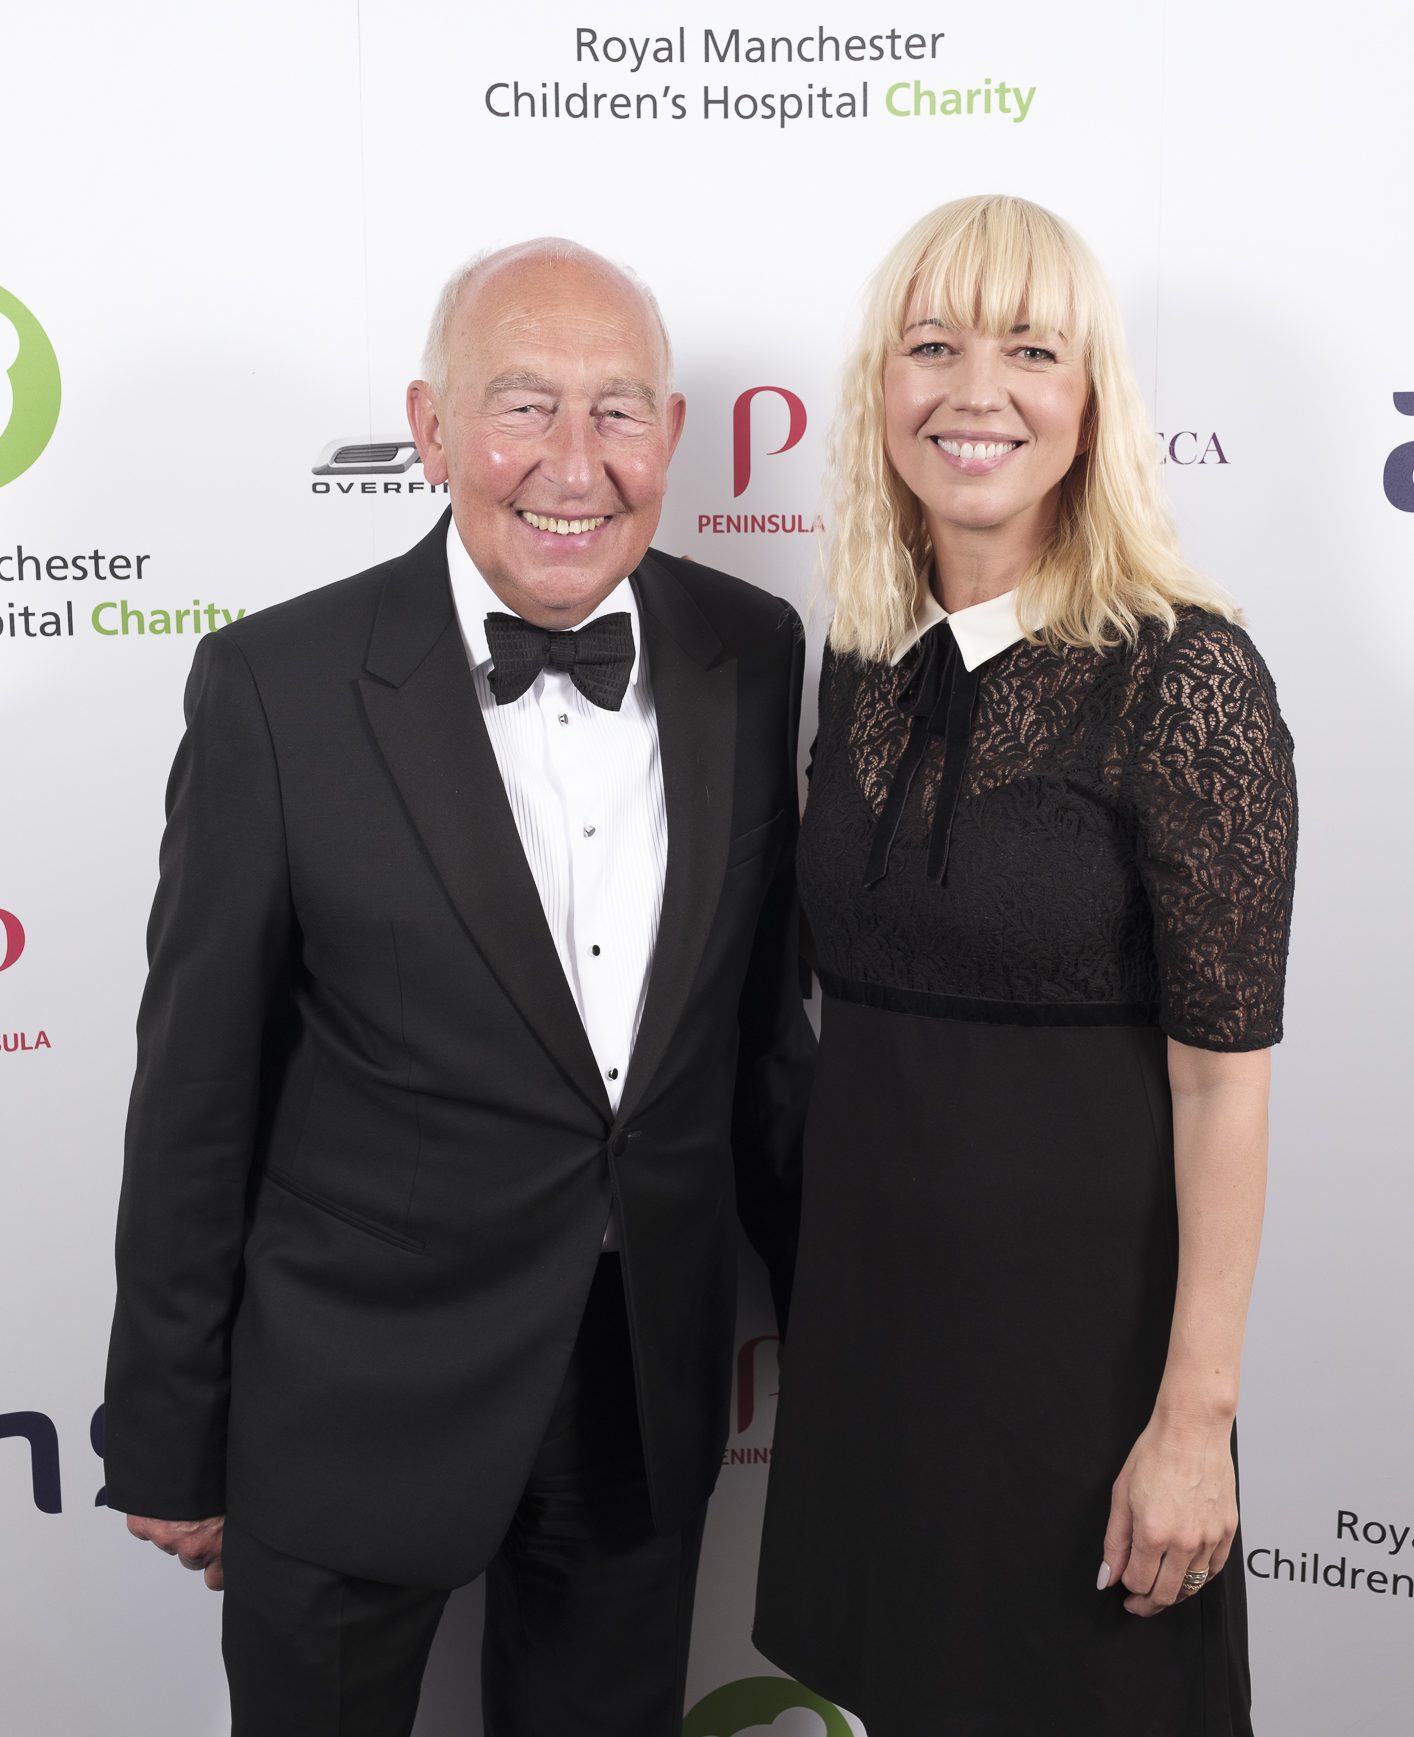 Chairman-of-the-fundraising-board-Mr-Maurice-Watkins-CBE-with-host-Sara-Cox